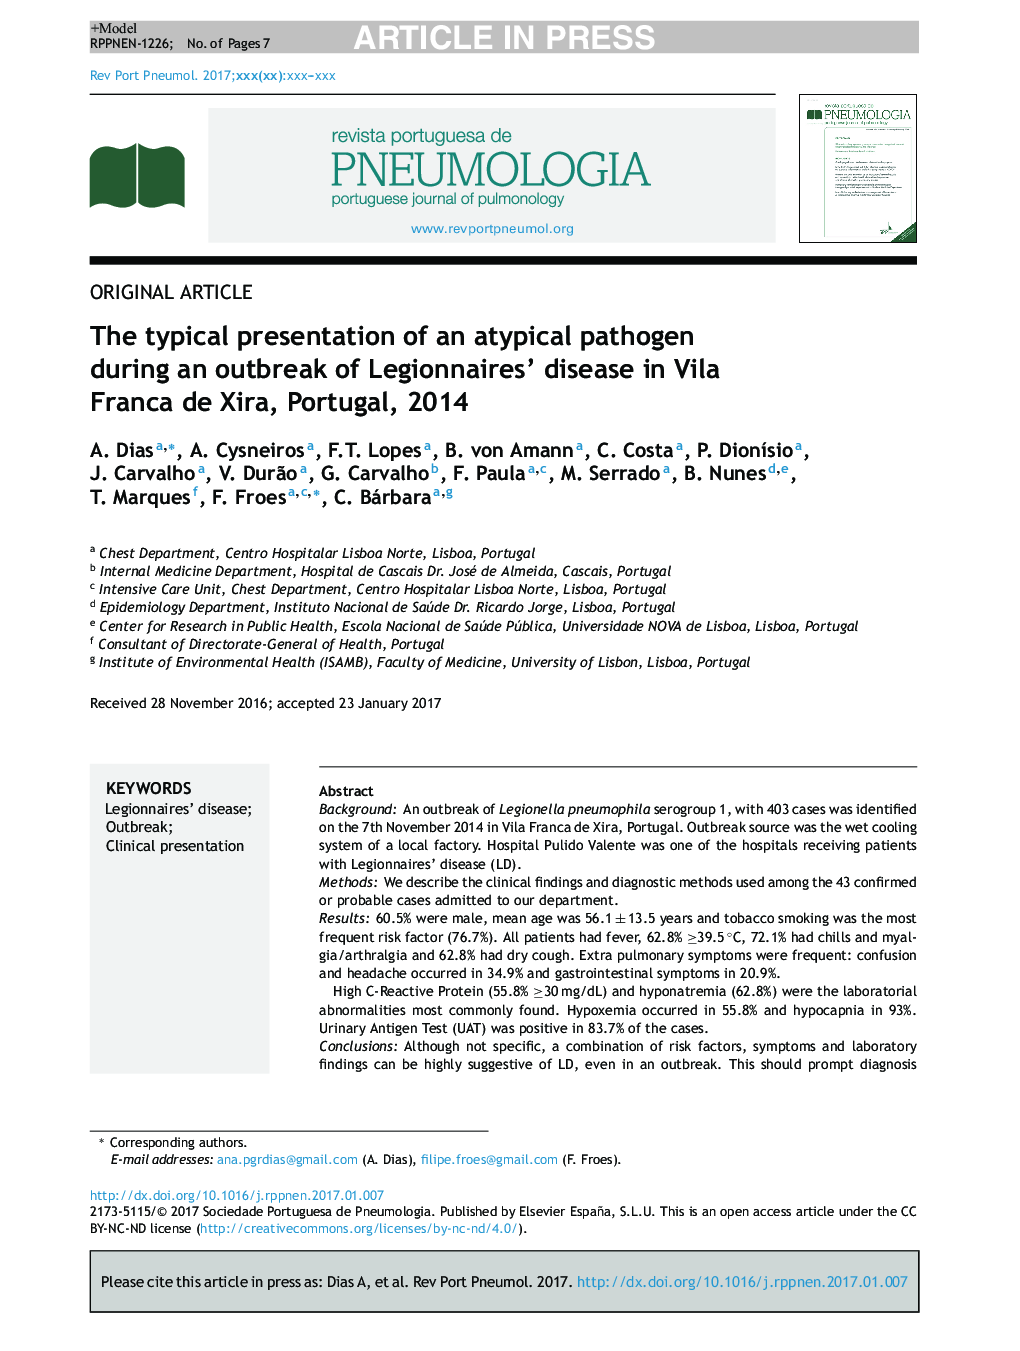 The typical presentation of an atypical pathogen during an outbreak of Legionnaires' disease in Vila Franca de Xira, Portugal, 2014